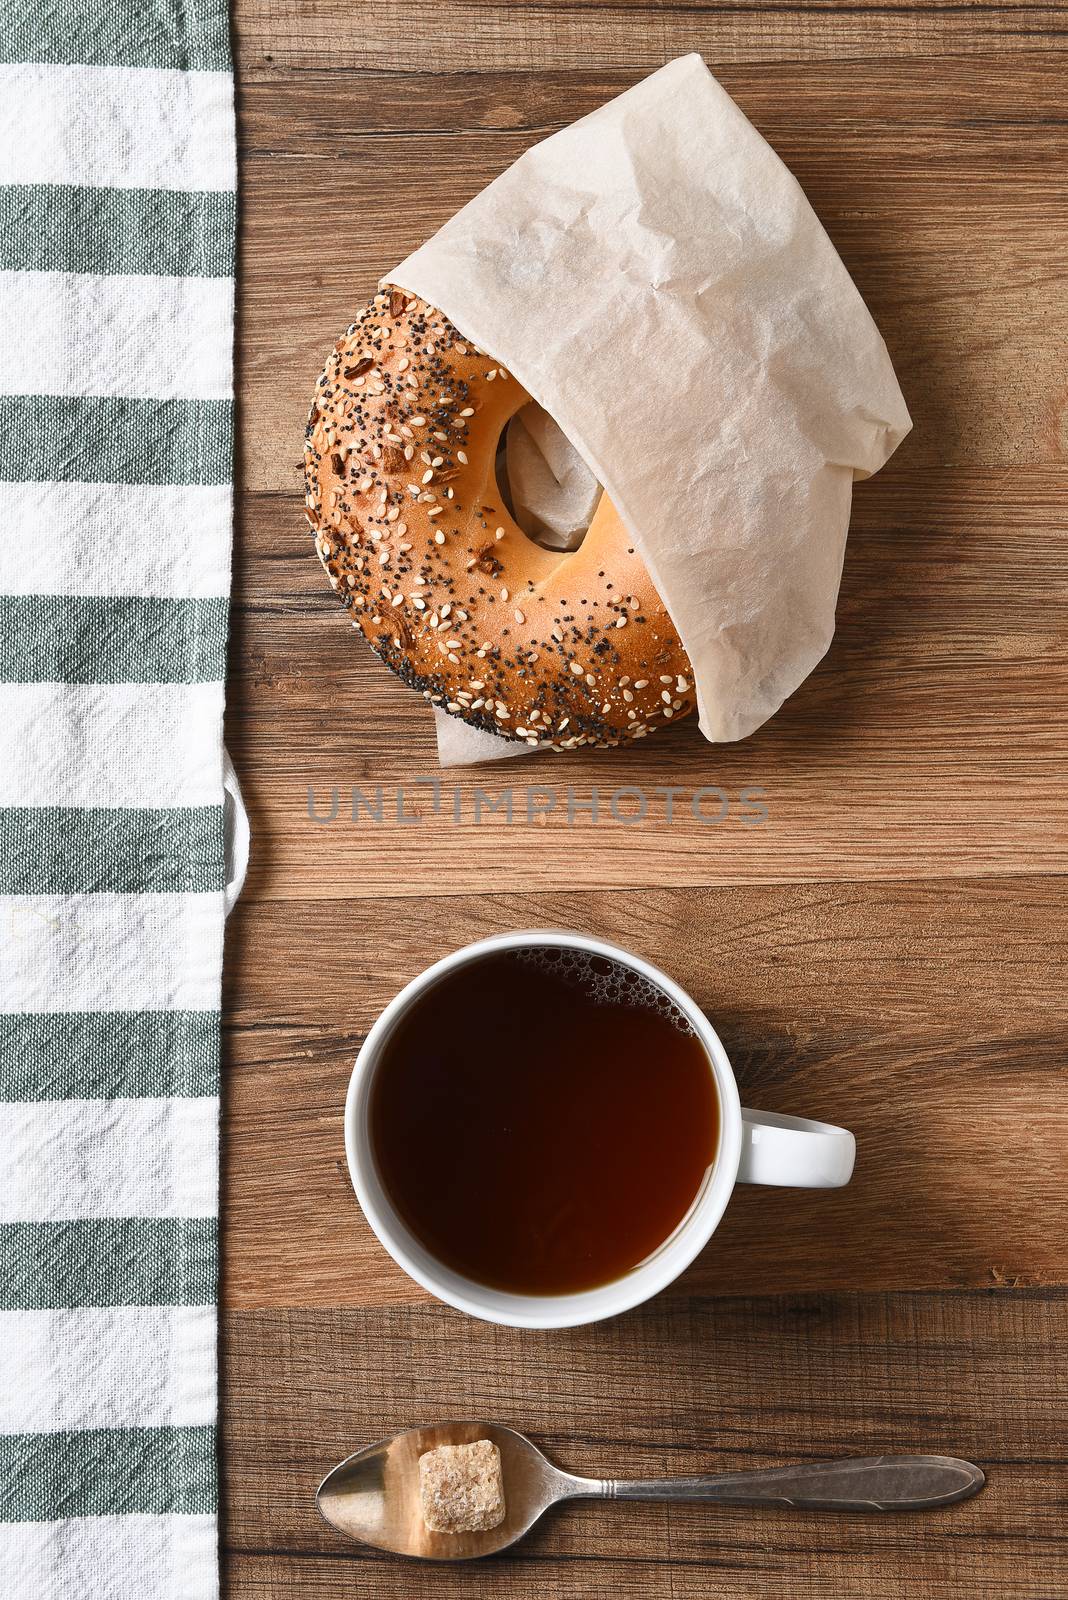 High angle view of a bagel, cup of coffee, and spoon with raw sugar lump with a striped towel.